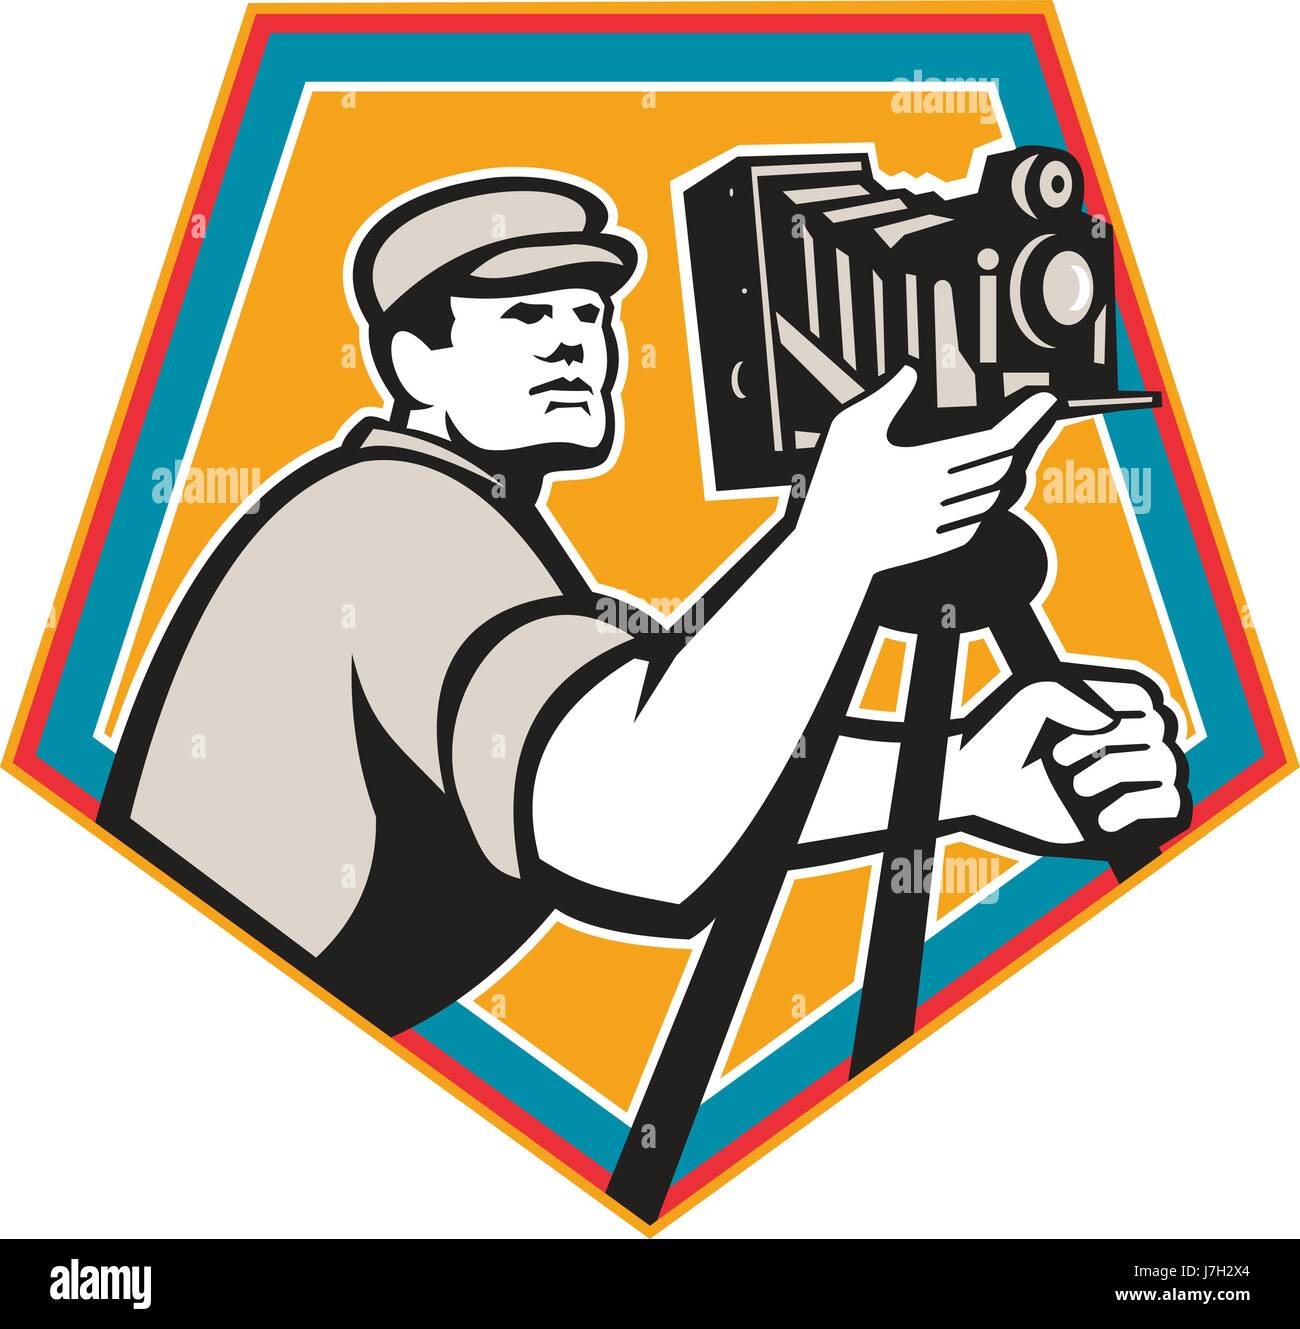 Illustration of a cameraman movie director with vintage movie film camera viewed from low angle set inside shield crest on isolated background done in Stock Vector